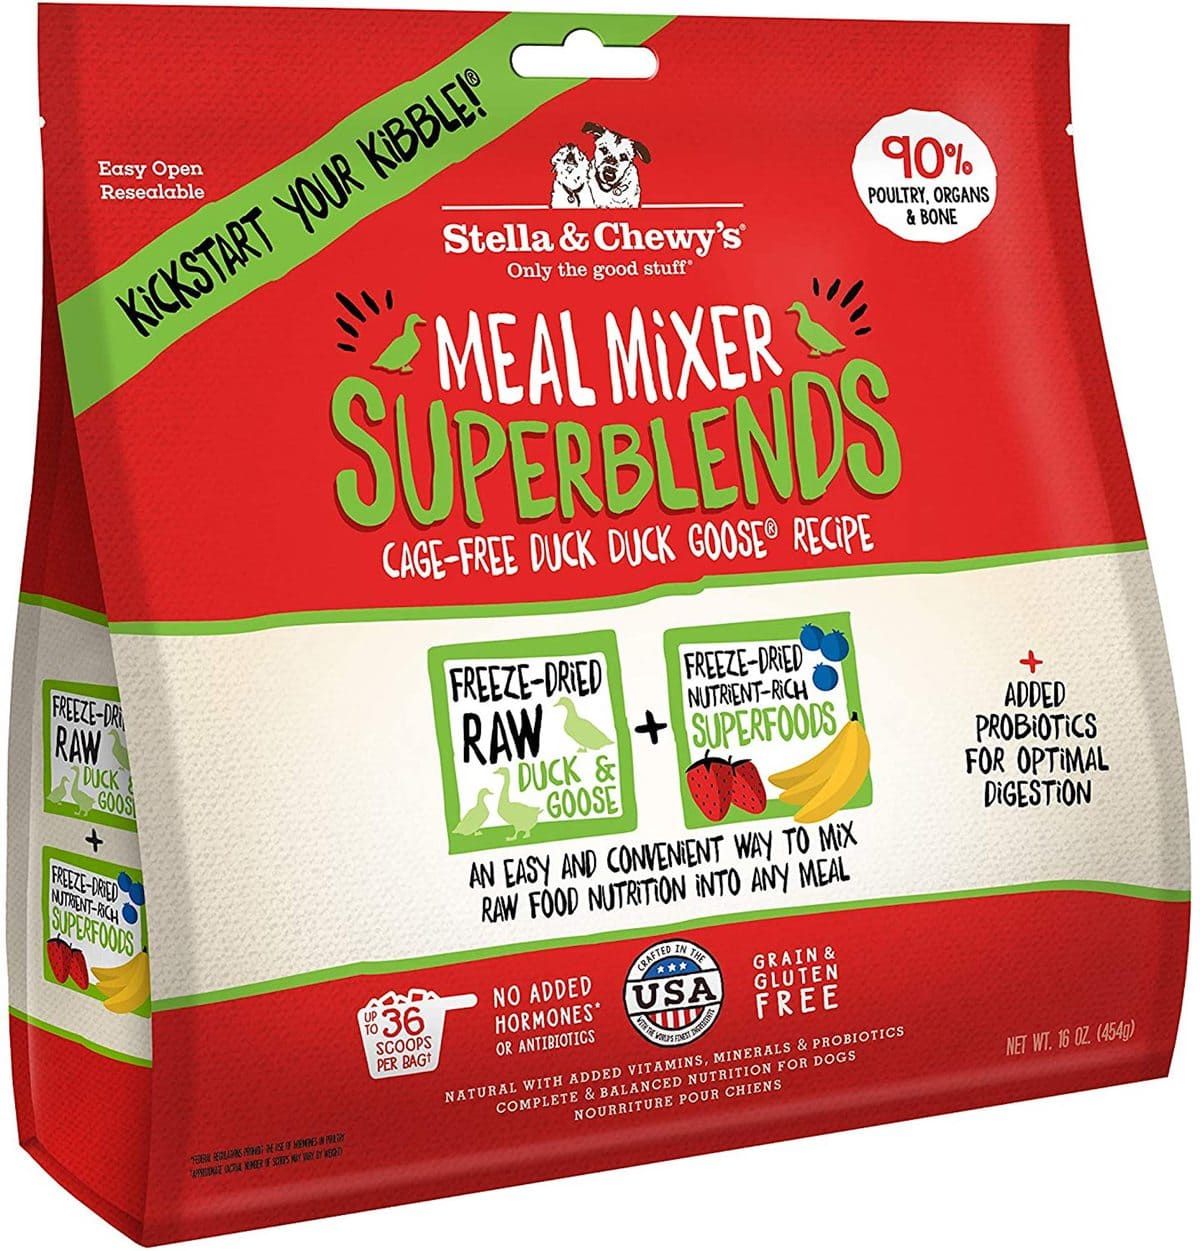 Stella & Chewy Meal Mixer Superblends